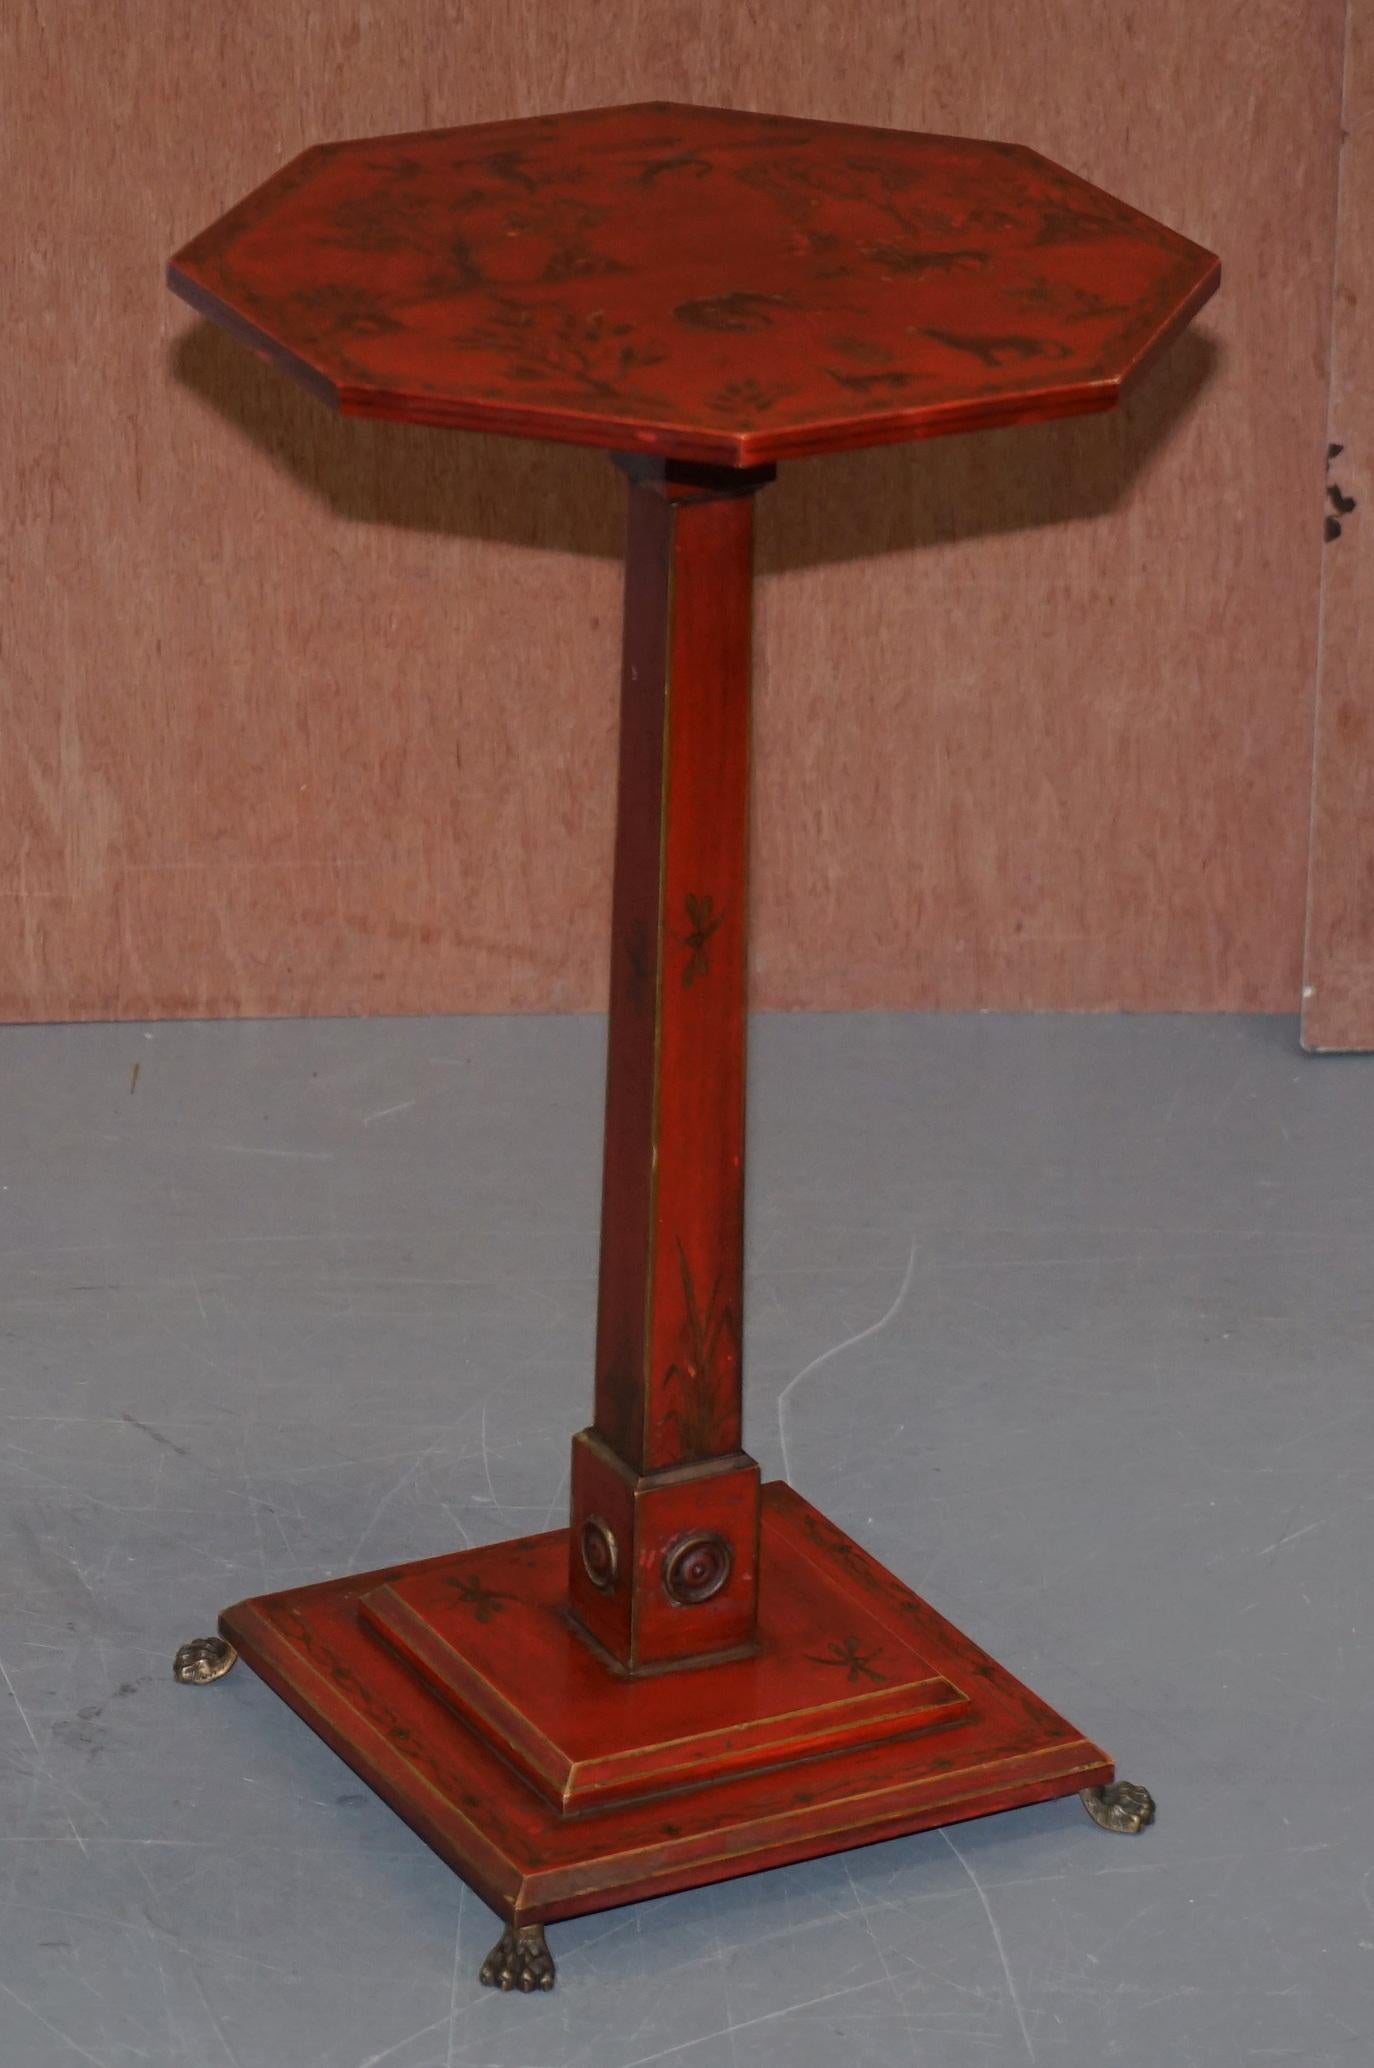 We are delighted to offer for sale this sublime pair of circa 1940s red lacquer chinoiserie decorated side tables 

I have another of these tables listed under my other items, its a single table and pretty much exactly the same apart from the base